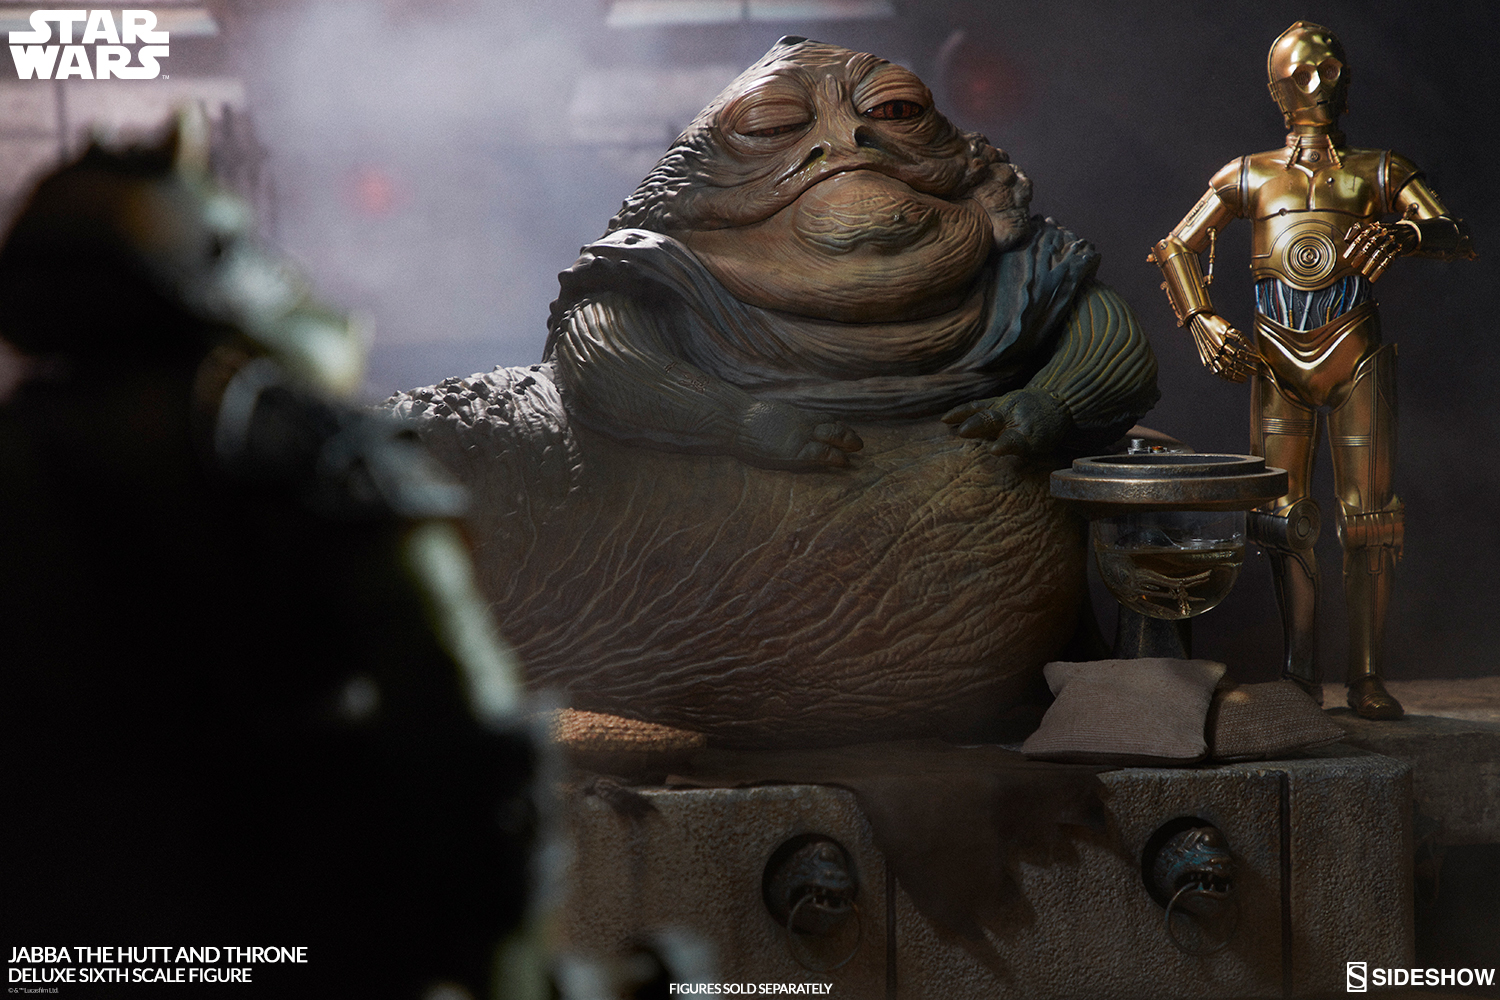 Star Wars Episode VI : Jabba the Hutt and throne - Deluxe Figure (Sideshow) Zx6Rhu8g_o